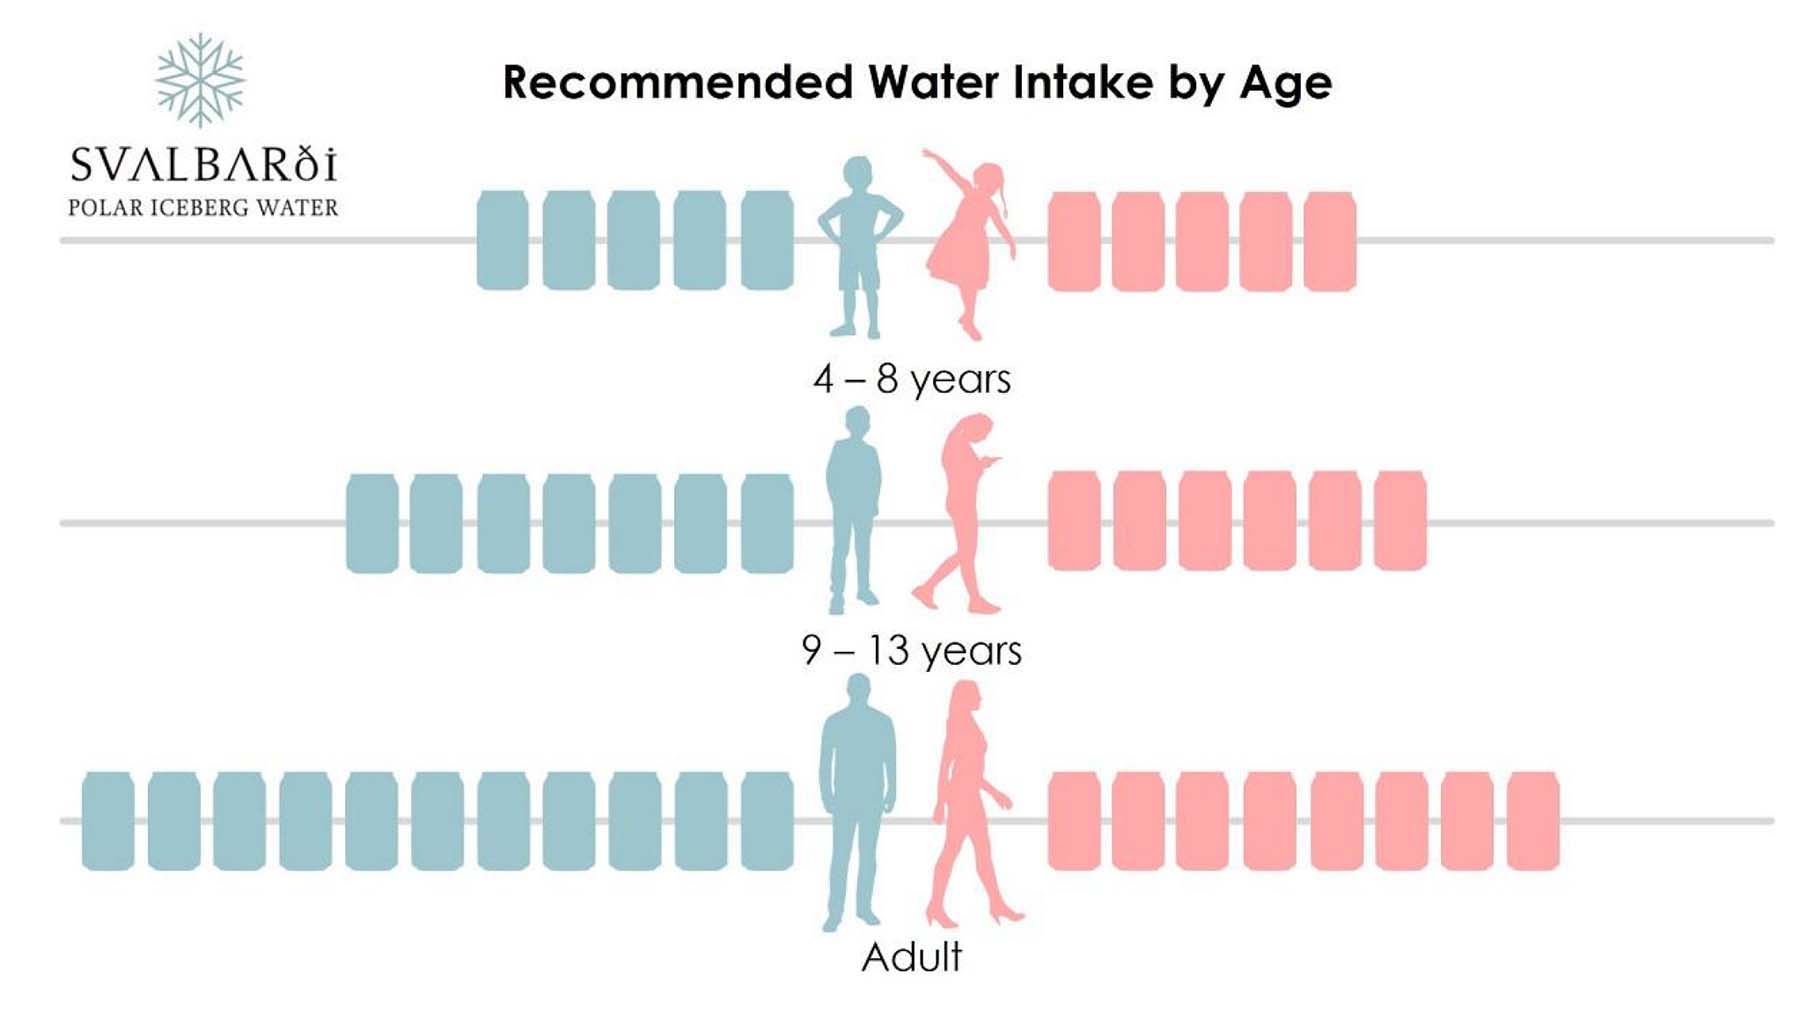 Recommended Daily Water Intake by Age